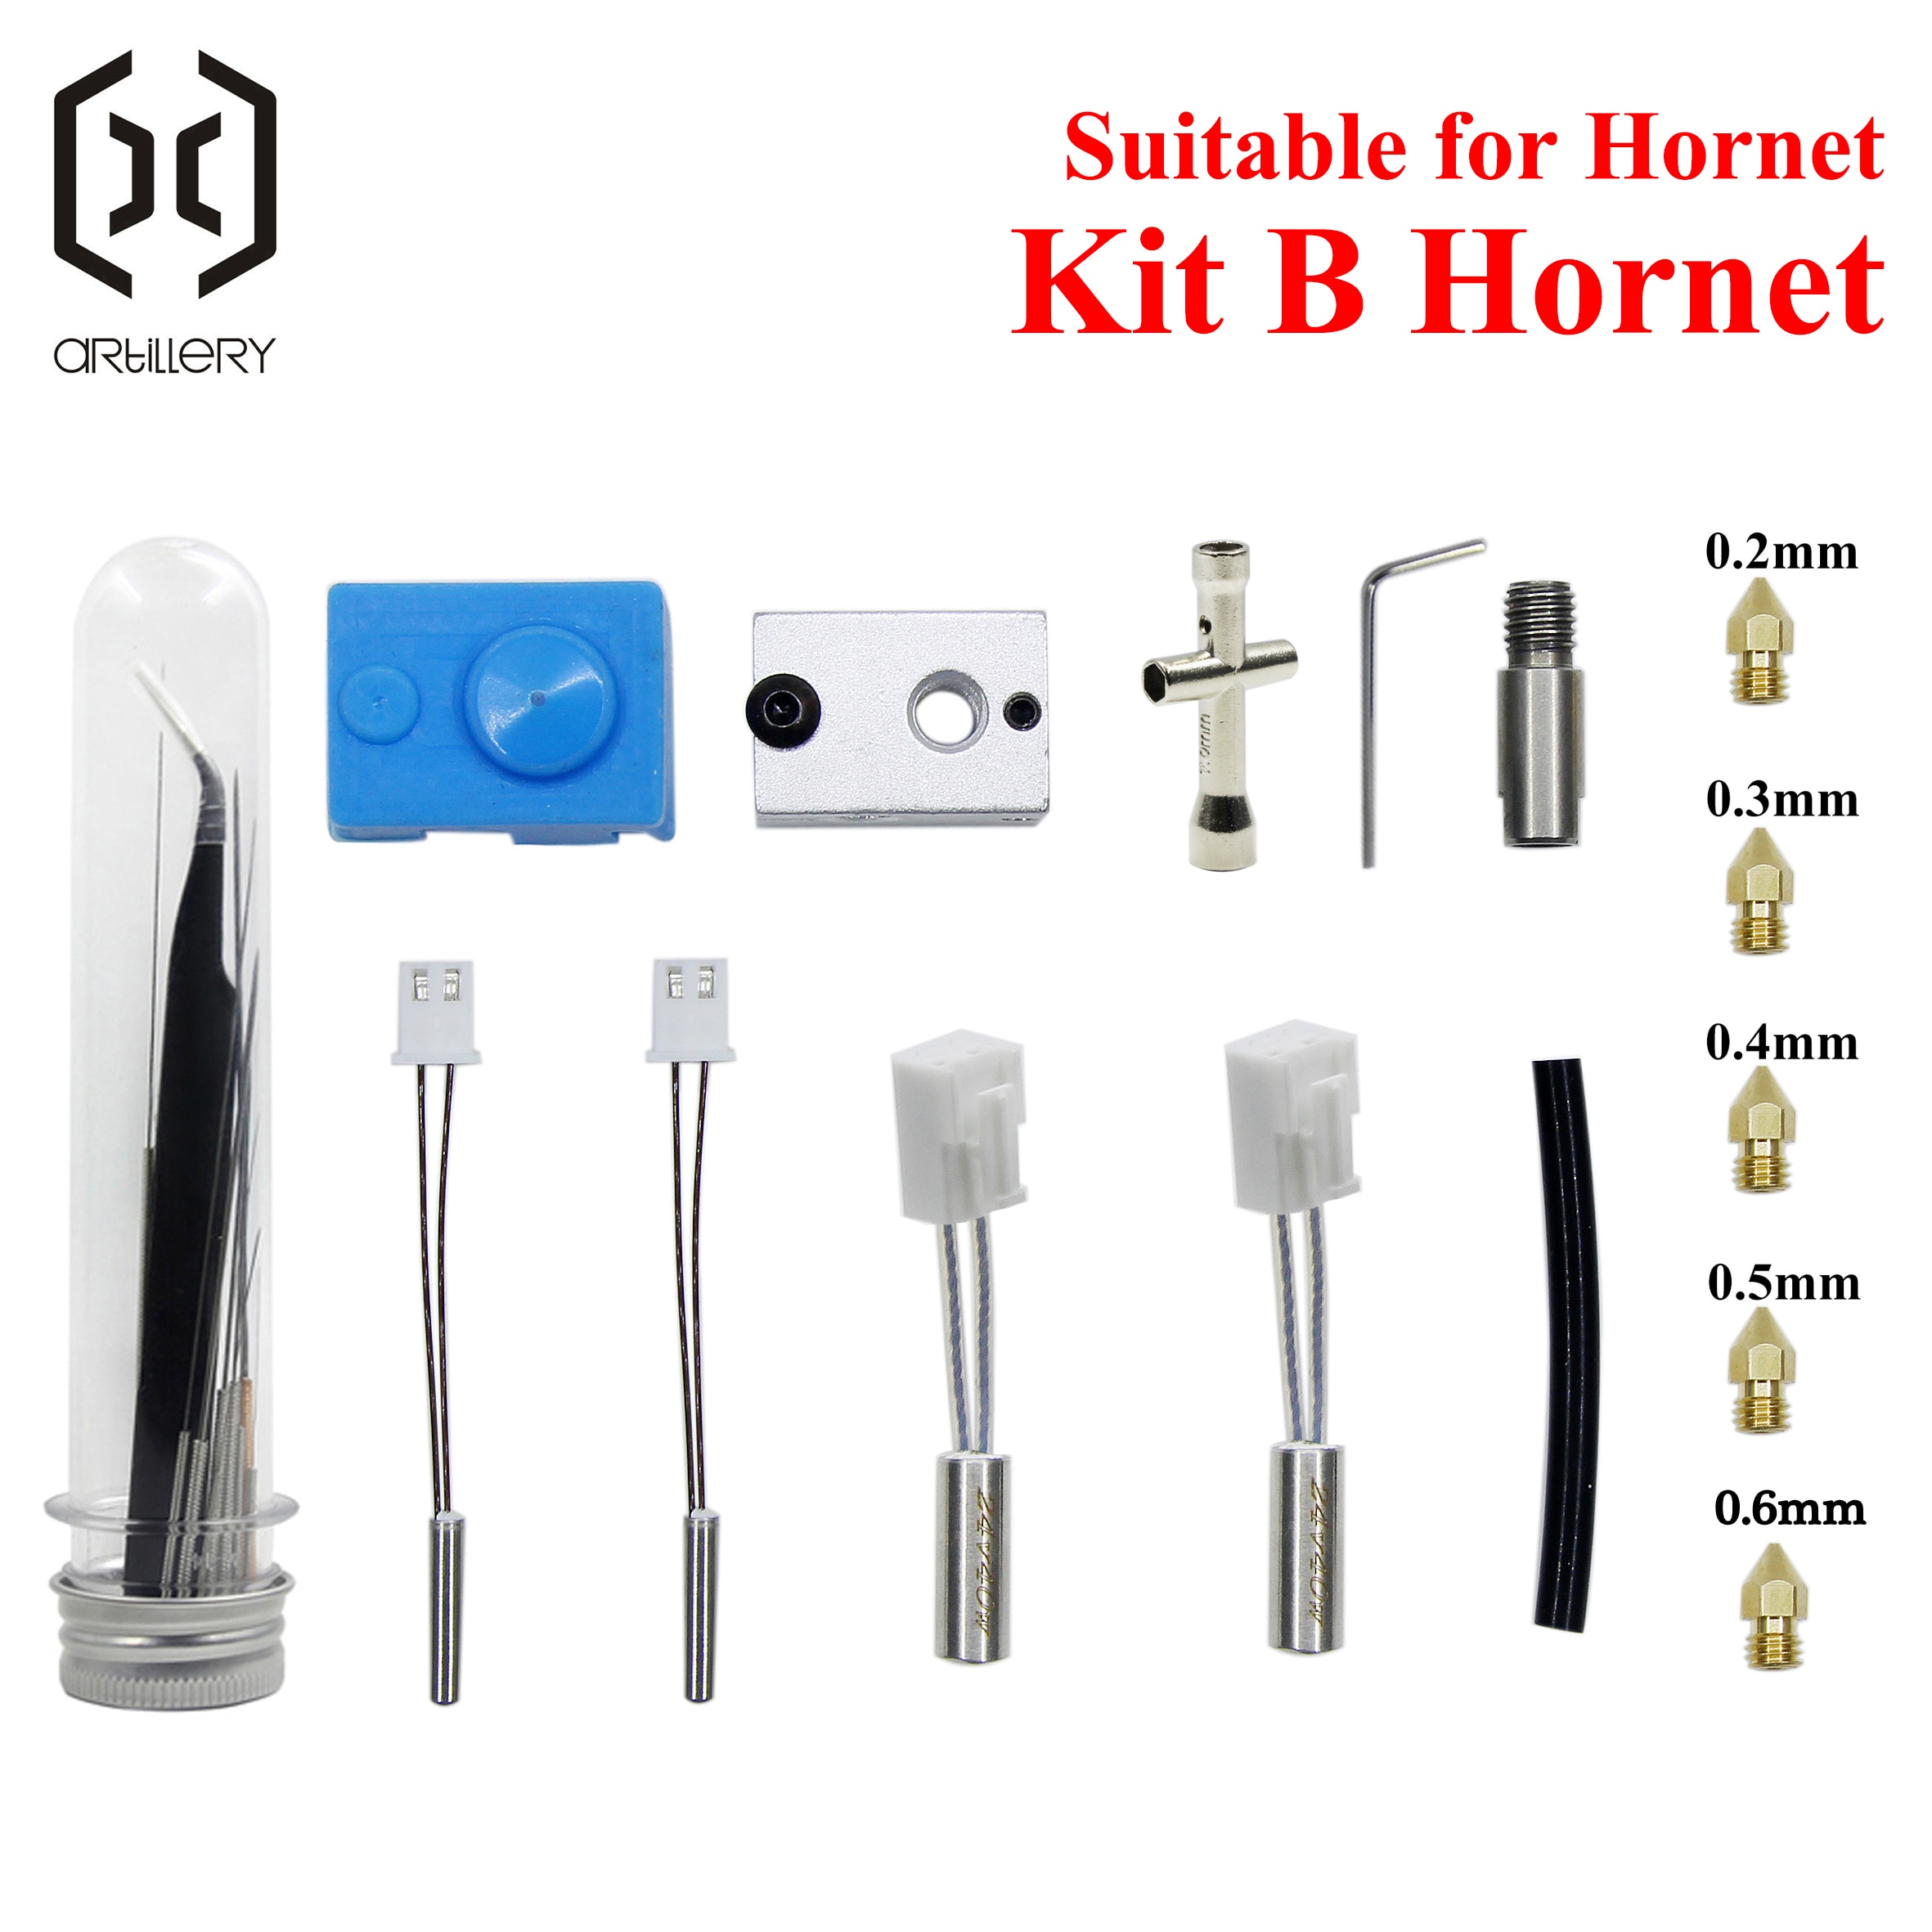 3D printer Artillery extruder Sidewinder X1 Genius and Hornet silicone nozzle kit heating block throat and thermistor idler arm: Kit B Hornet